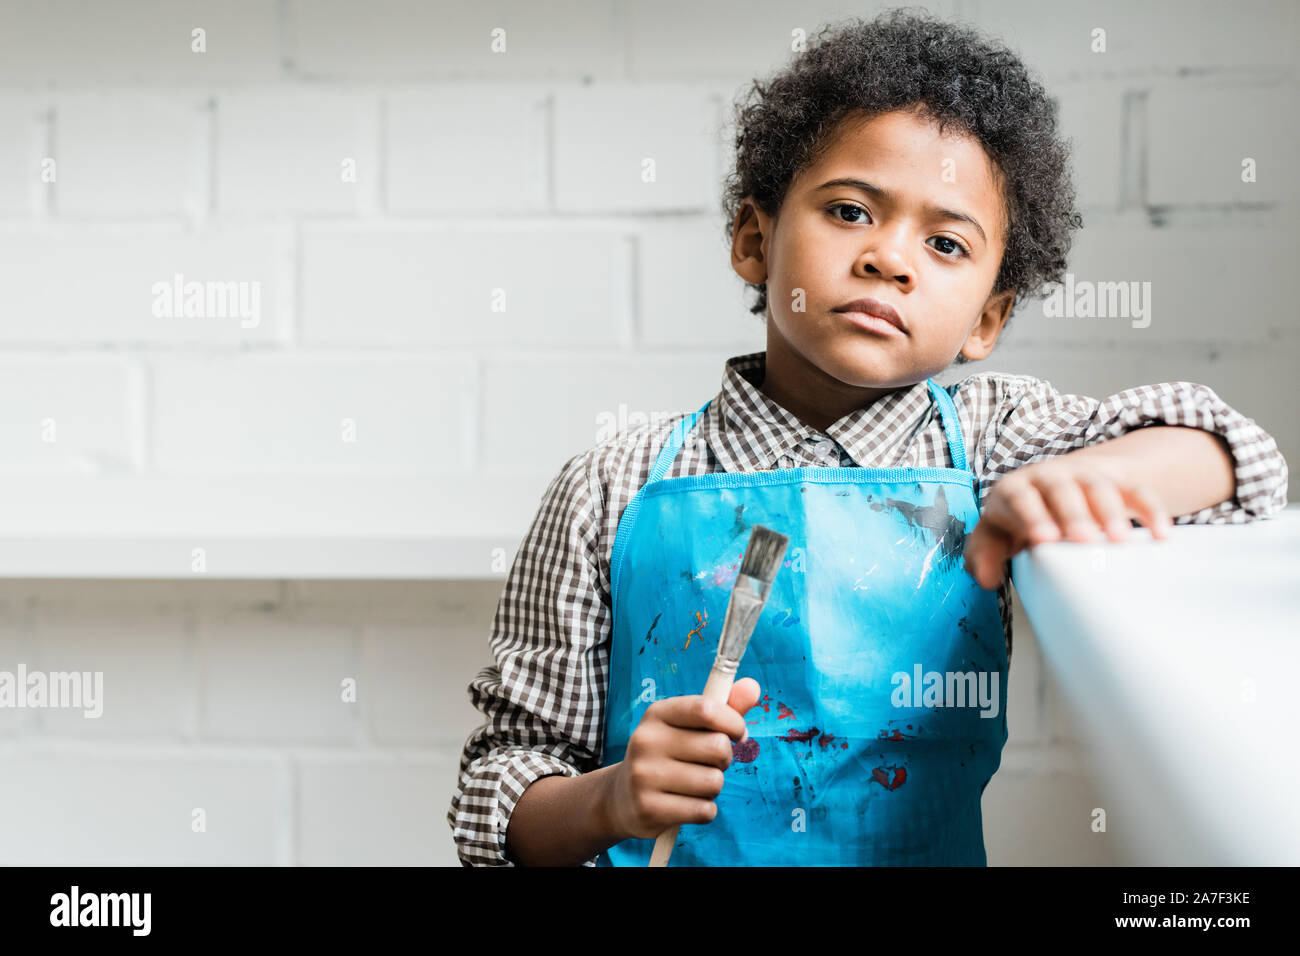 Serious African schoolboy in blue apron holding paintbrush in hand Stock Photo